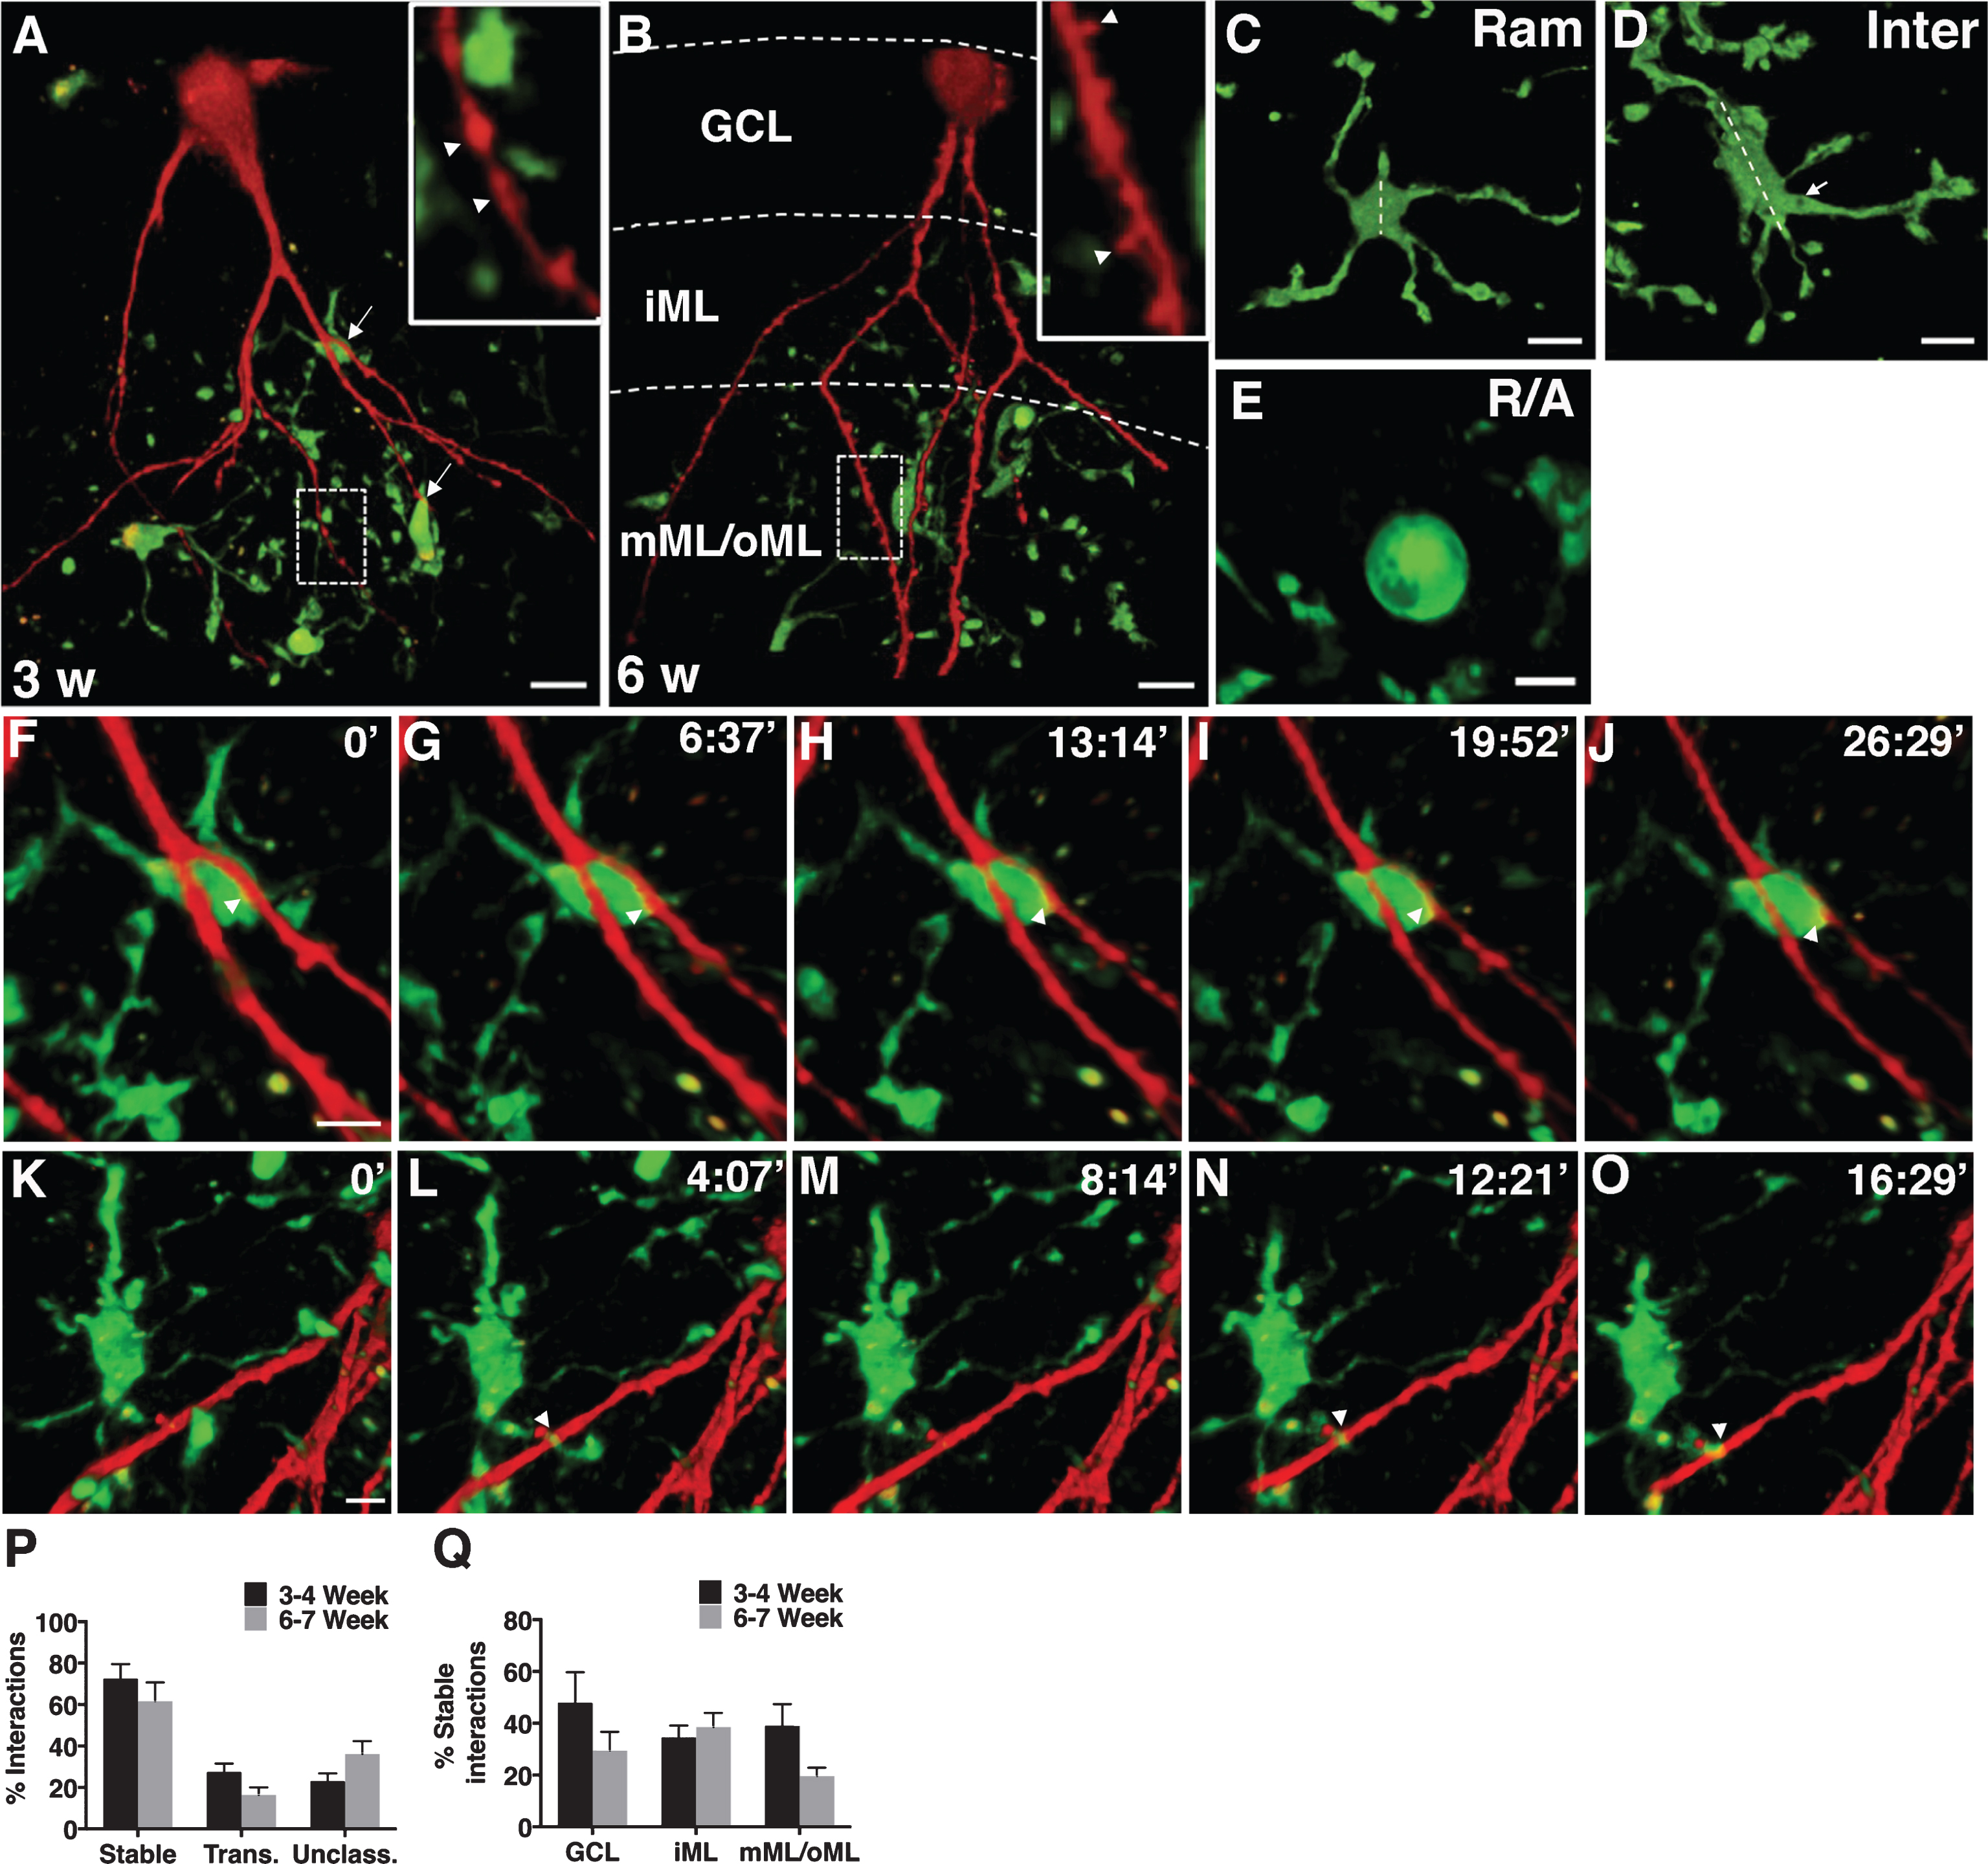 A-B, Photomicrographs representing EGFP+ microglia and RFP+ newborn neurons at 3- (A) and 6- (B) weeks after RV-RFP injection in CX3CR1GFP/+ mice (arrows indicate interactions in A, arrow heads indicate dendritic beading at 3 weeks in A and spines at 6 weeks in B). C-E, Images showing different morphologies of microglia: ramified (Ram; C), intermediate (Inter; D) and round/amoeboid (R/A; E). Dotted lines in C and D outline the largest diameter of the cell soma. Note the elongated shape of cell soma and the thicker processes (marked by an arrow) of an  intermediate microglia in D. F-O, 2-p images showing the dynamics of interactions between newborn neuron and microglia (arrowheads indicate stable interaction in F-J and a transient interaction in K-O). P, Quantification of relative percentage of stable, transient, and unclassified interactions in 3 and 6 weeks-old neurons. Q, Quantification of relative percentage of stable interactions in 3 and 6 weeks-old neurons in GCL, iML, and mML/oML. Scale bars: 13.55 μm (A,B), 9.03 μm (C,D), 6.77 μm (E), and 6.77 μm (in F for F-J and in K for K-O). GCL: granule cell layer, iML: inner molecular layer, mML/oML: middle/outer molecular layer, Trans: transient, Unclass: unclassified.n = 10 mice for 3-4 weeks group andn = 7 mice for 6-7 weeks group.